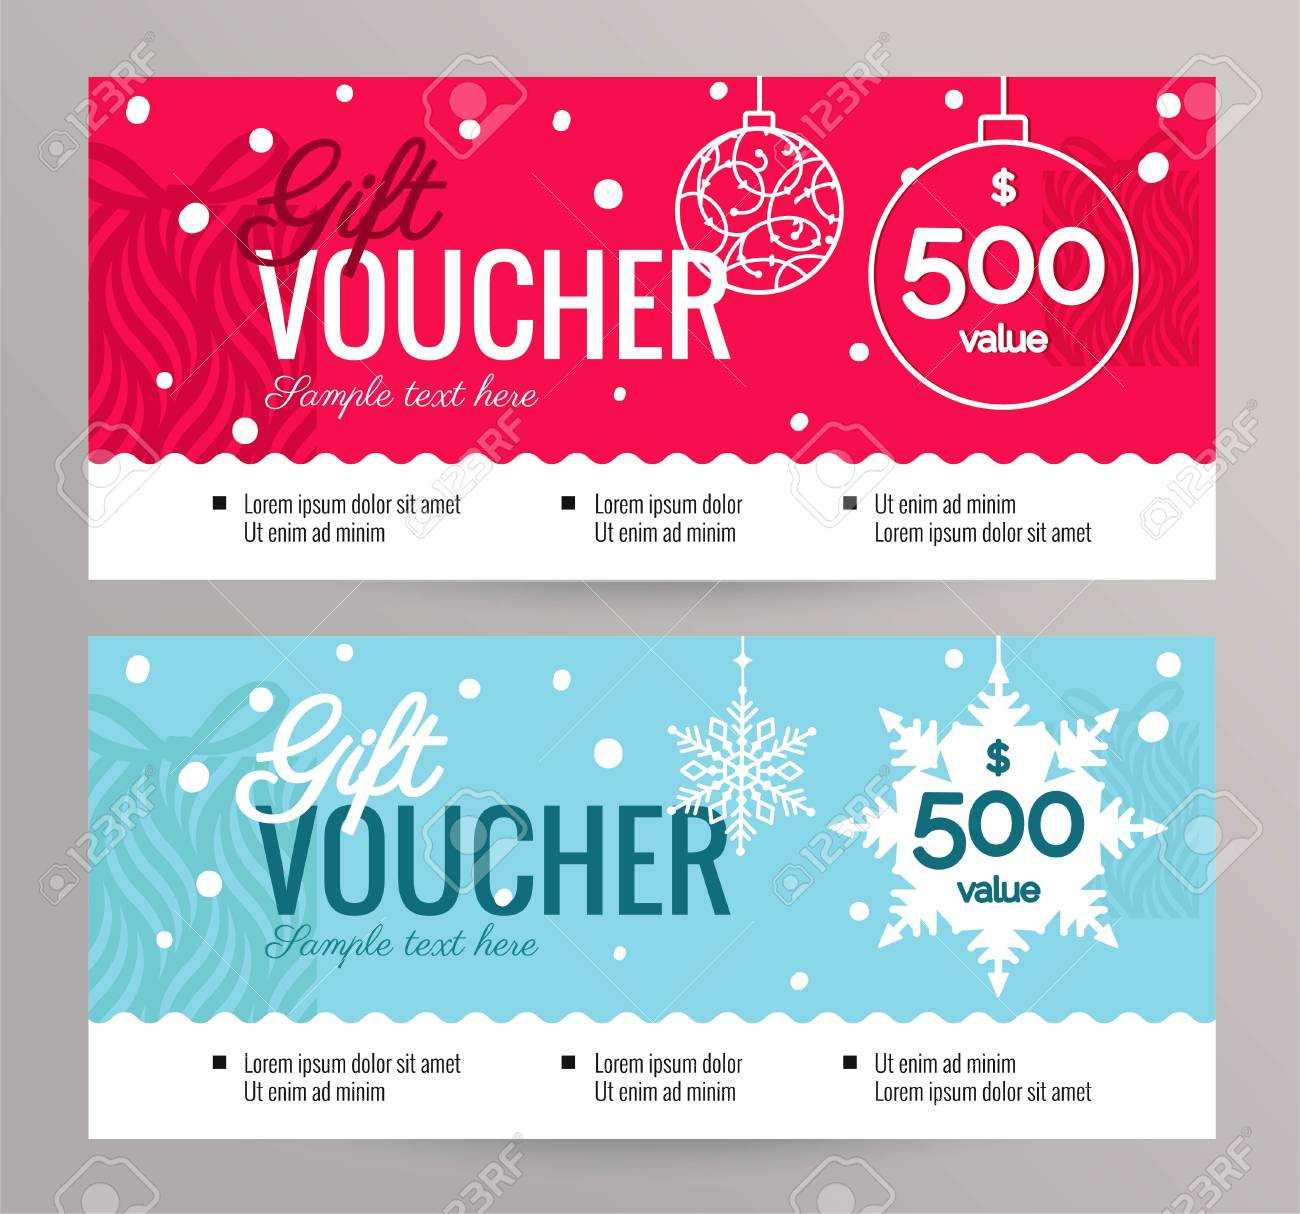 Christmas Gift Voucher Coupon Discount. Gift Certificate Template.. In Merry Christmas Gift Certificate Templates